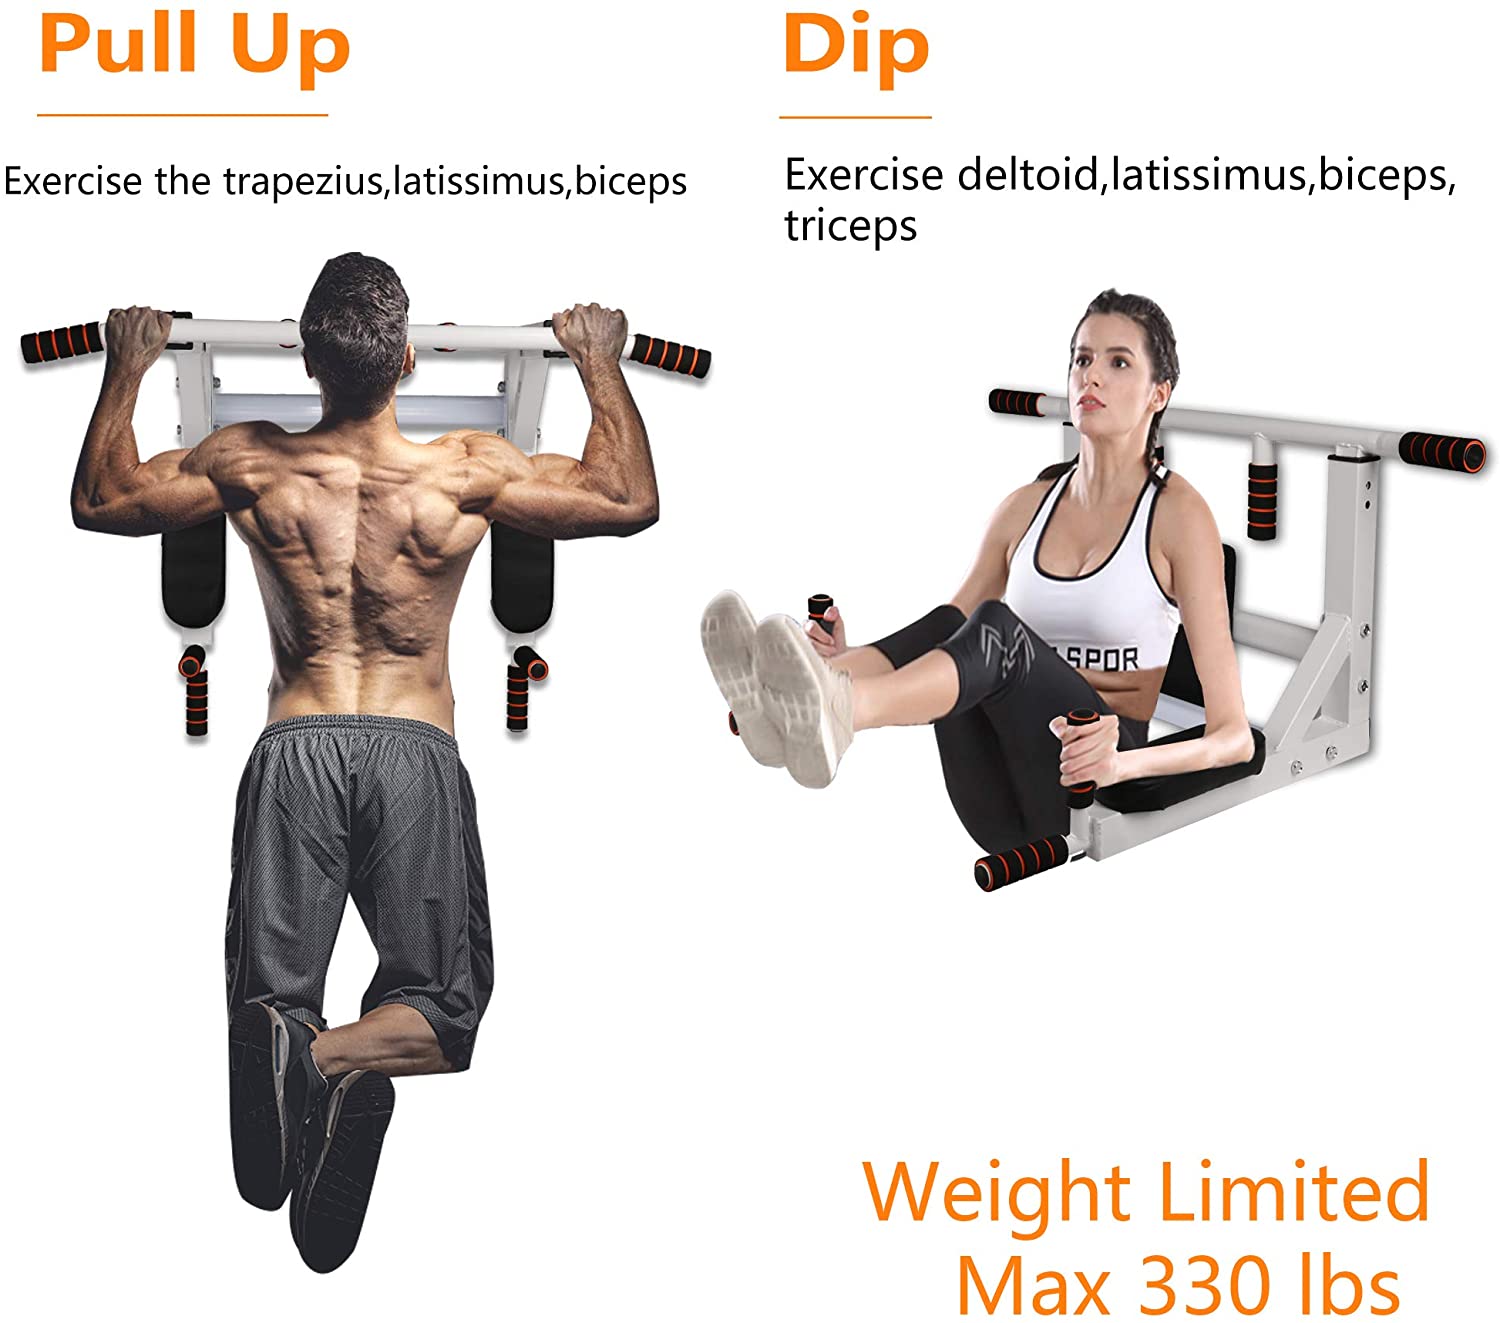 2 in 1 Wall Mounted Pull Up Bar Multifunctional Chin Up Bar and Dip Station